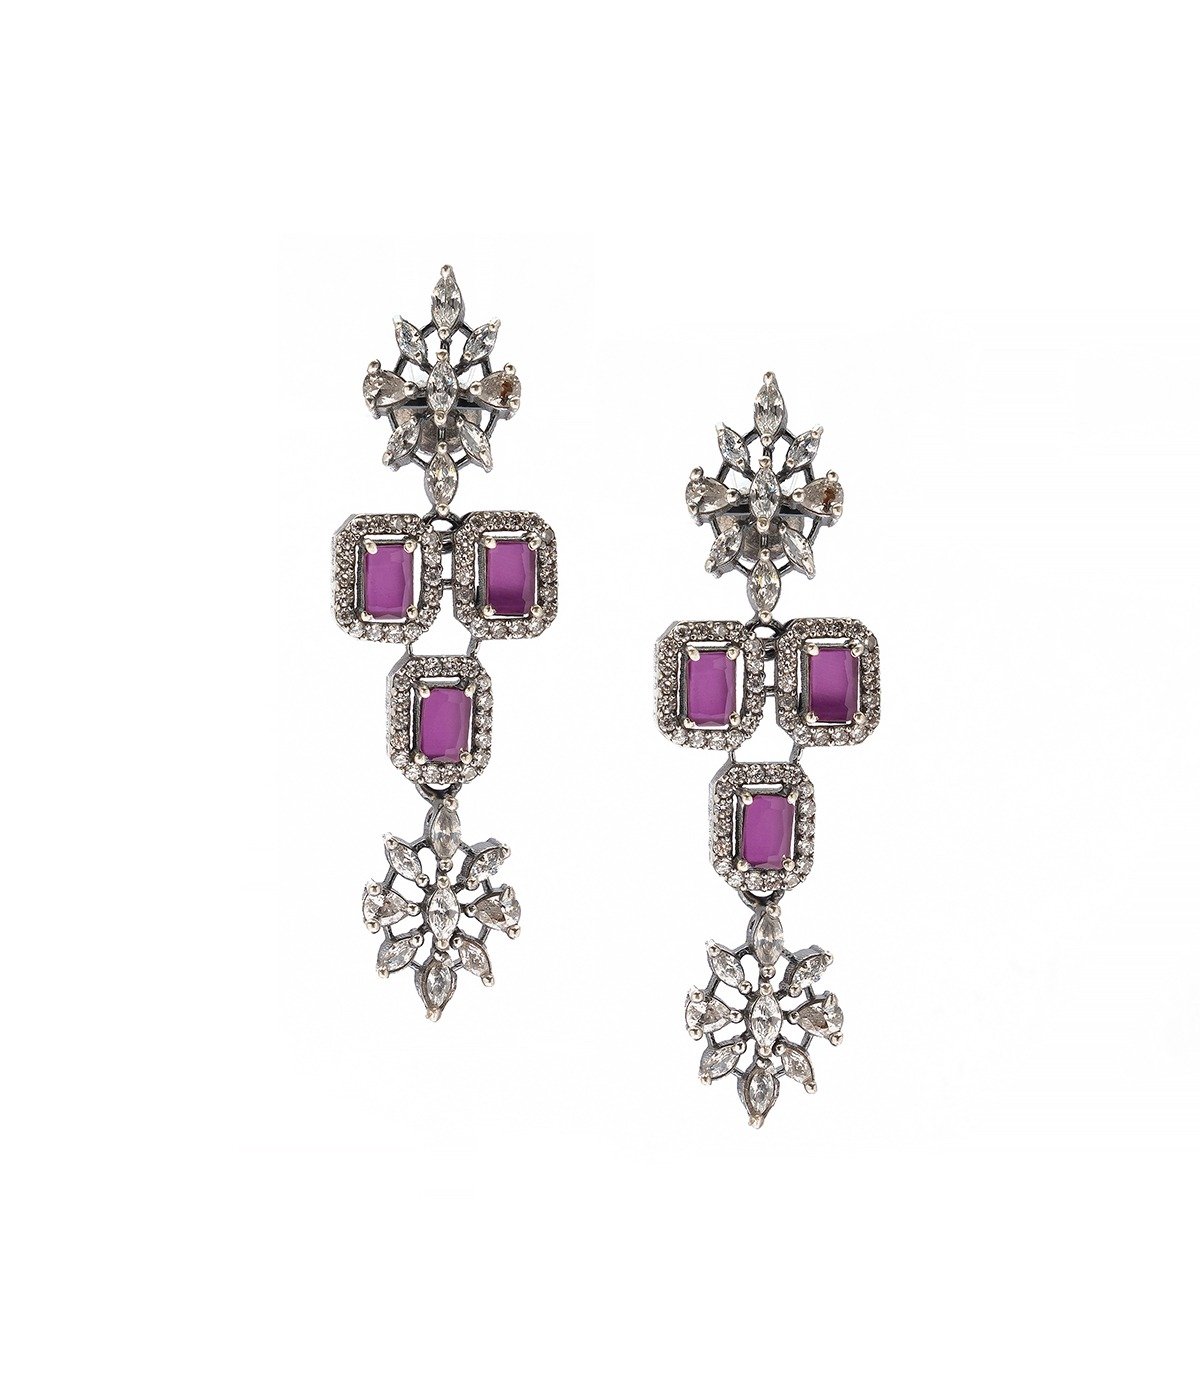 FLORAL PINK SṬONE STUDDED FASHION EARRINGS FOR GIRLS